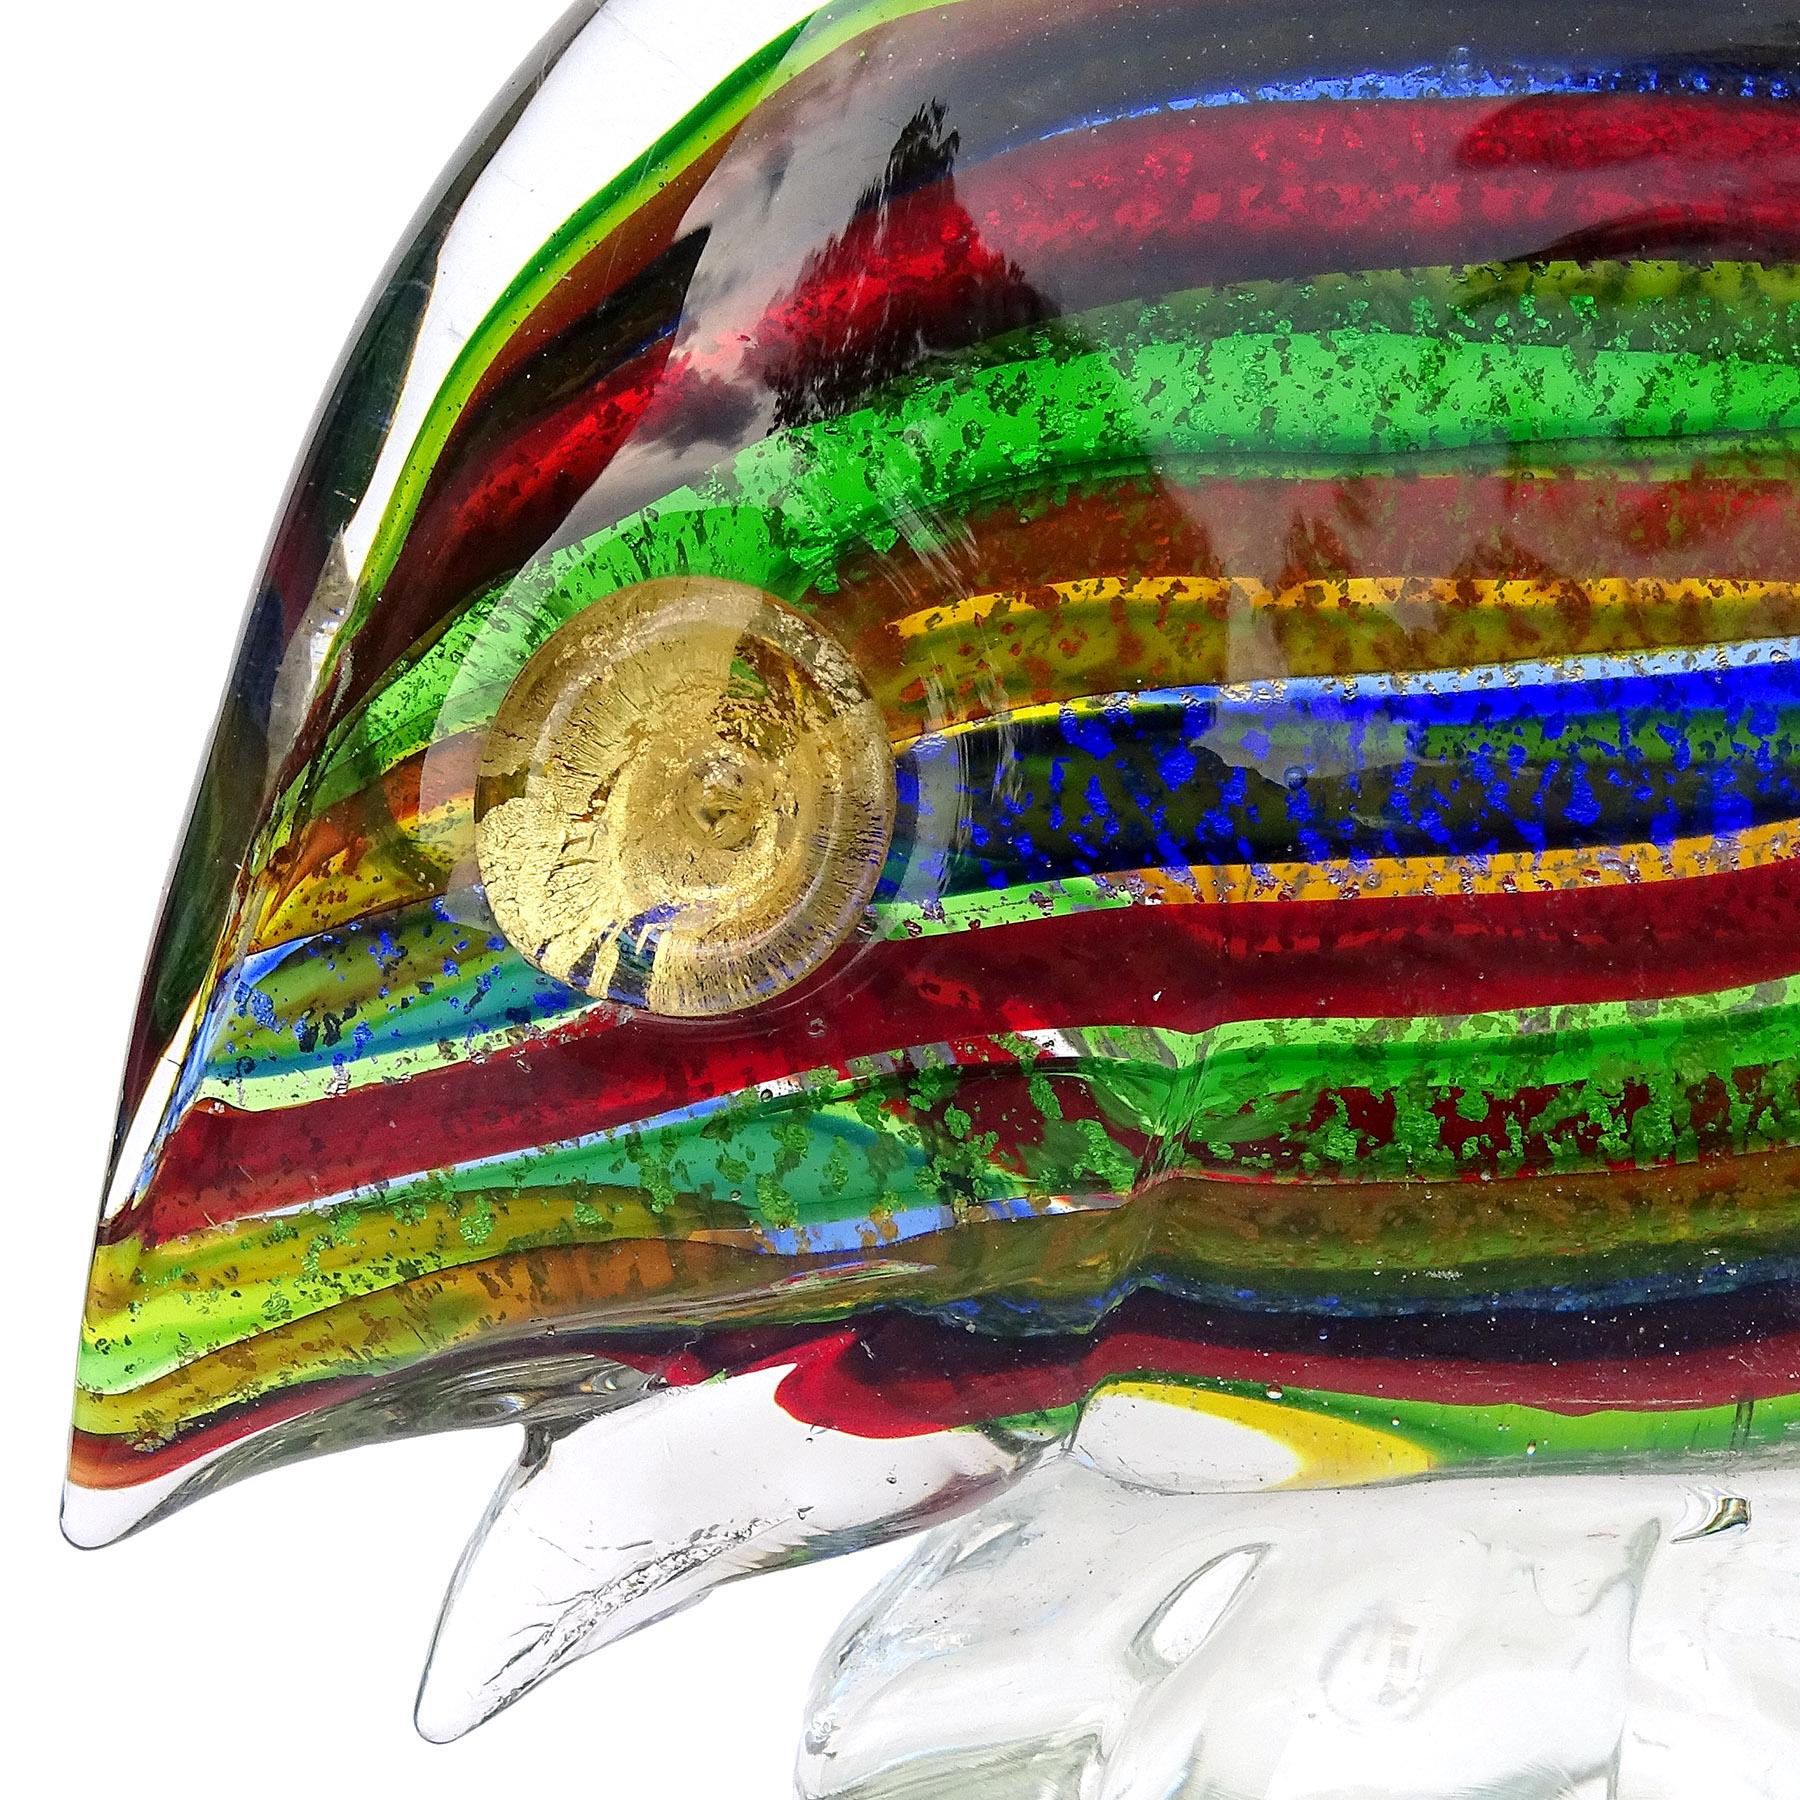 Beautiful vintage Murano hand blown rainbow stripes, silver and gold flecks Italian art glass fish figurine. Attributed to the A.Ve.M. (Arte Vetraria Muranese) company. The fish has alternating bands of cobalt blue, red, green, yellow and orange